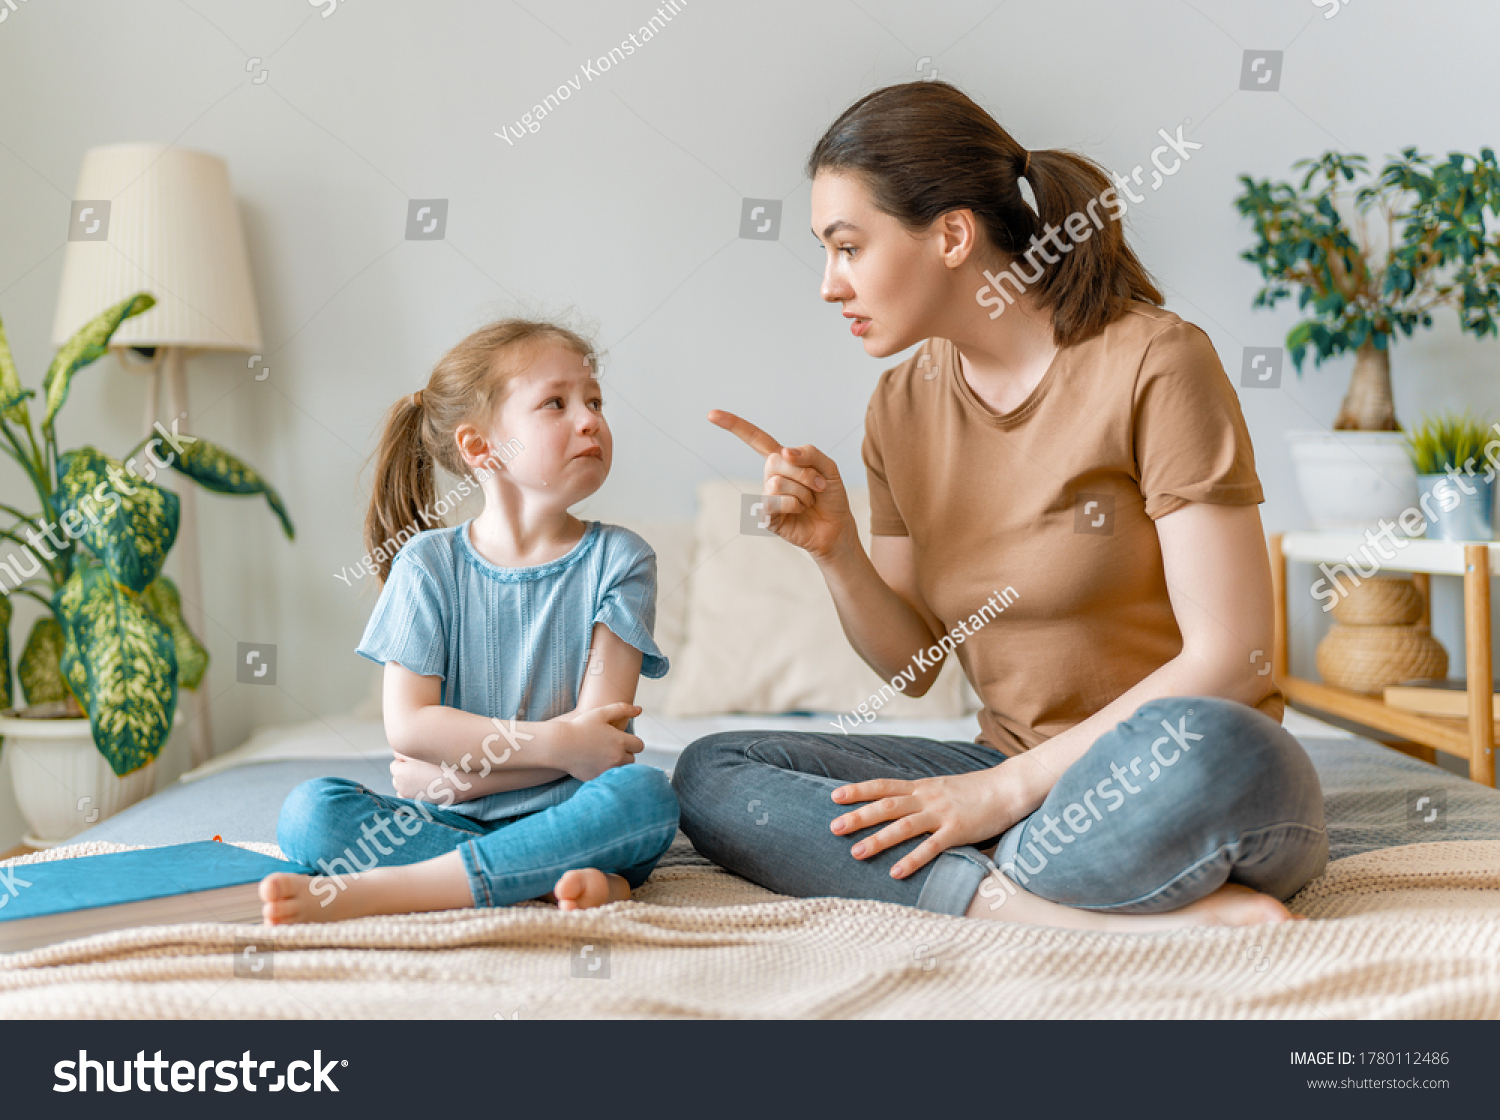 mother is scolding her child girl. family relationships #1780112486